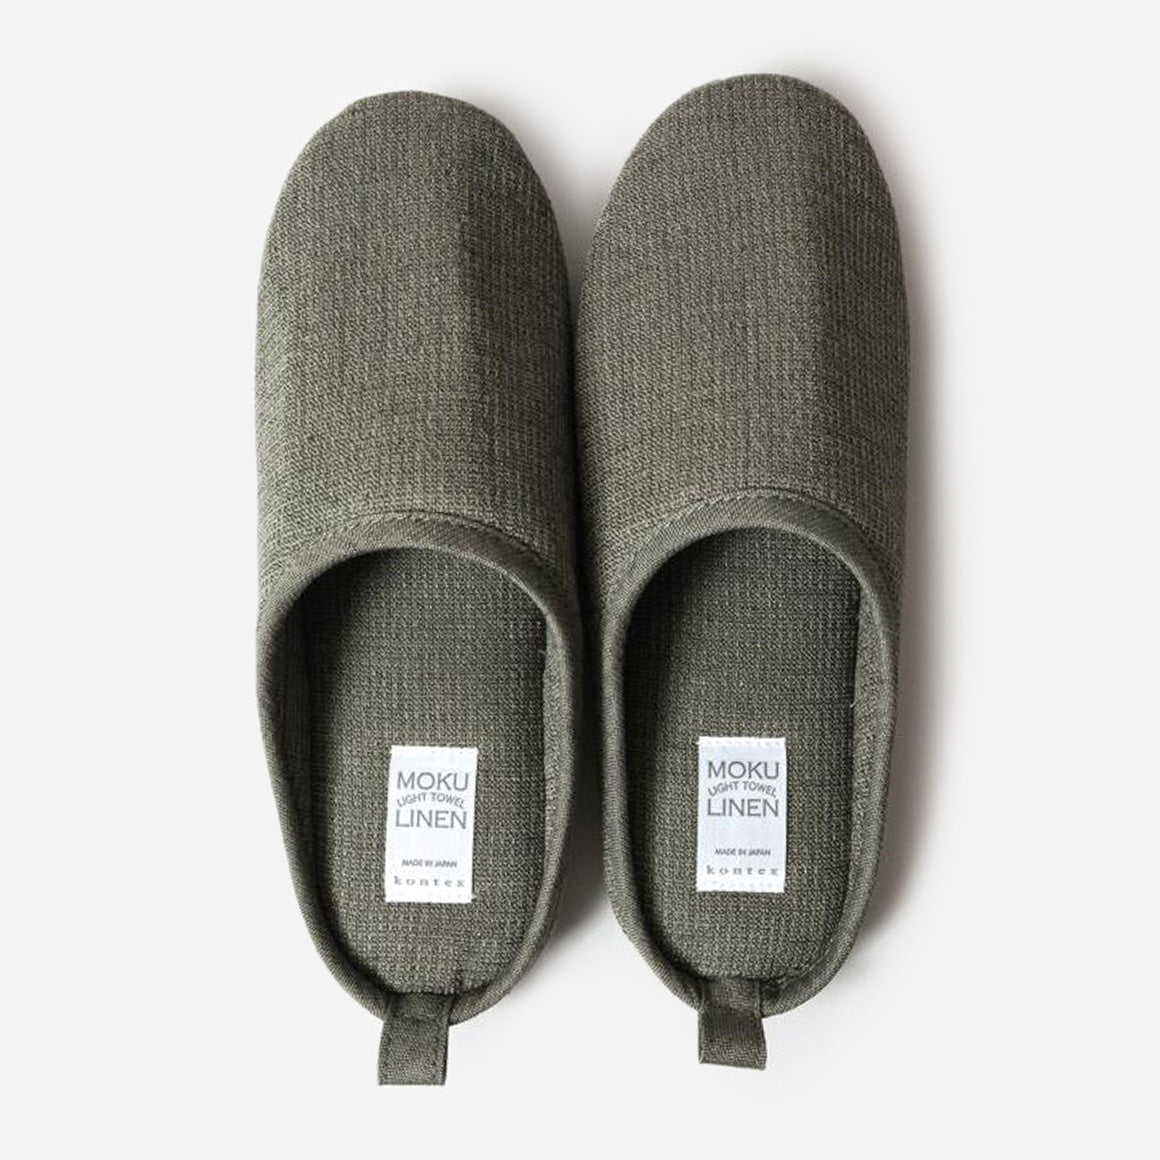 Top-down view of grey house slippers against white background. Moku Light Towel Linen written on white product tag on footbed.